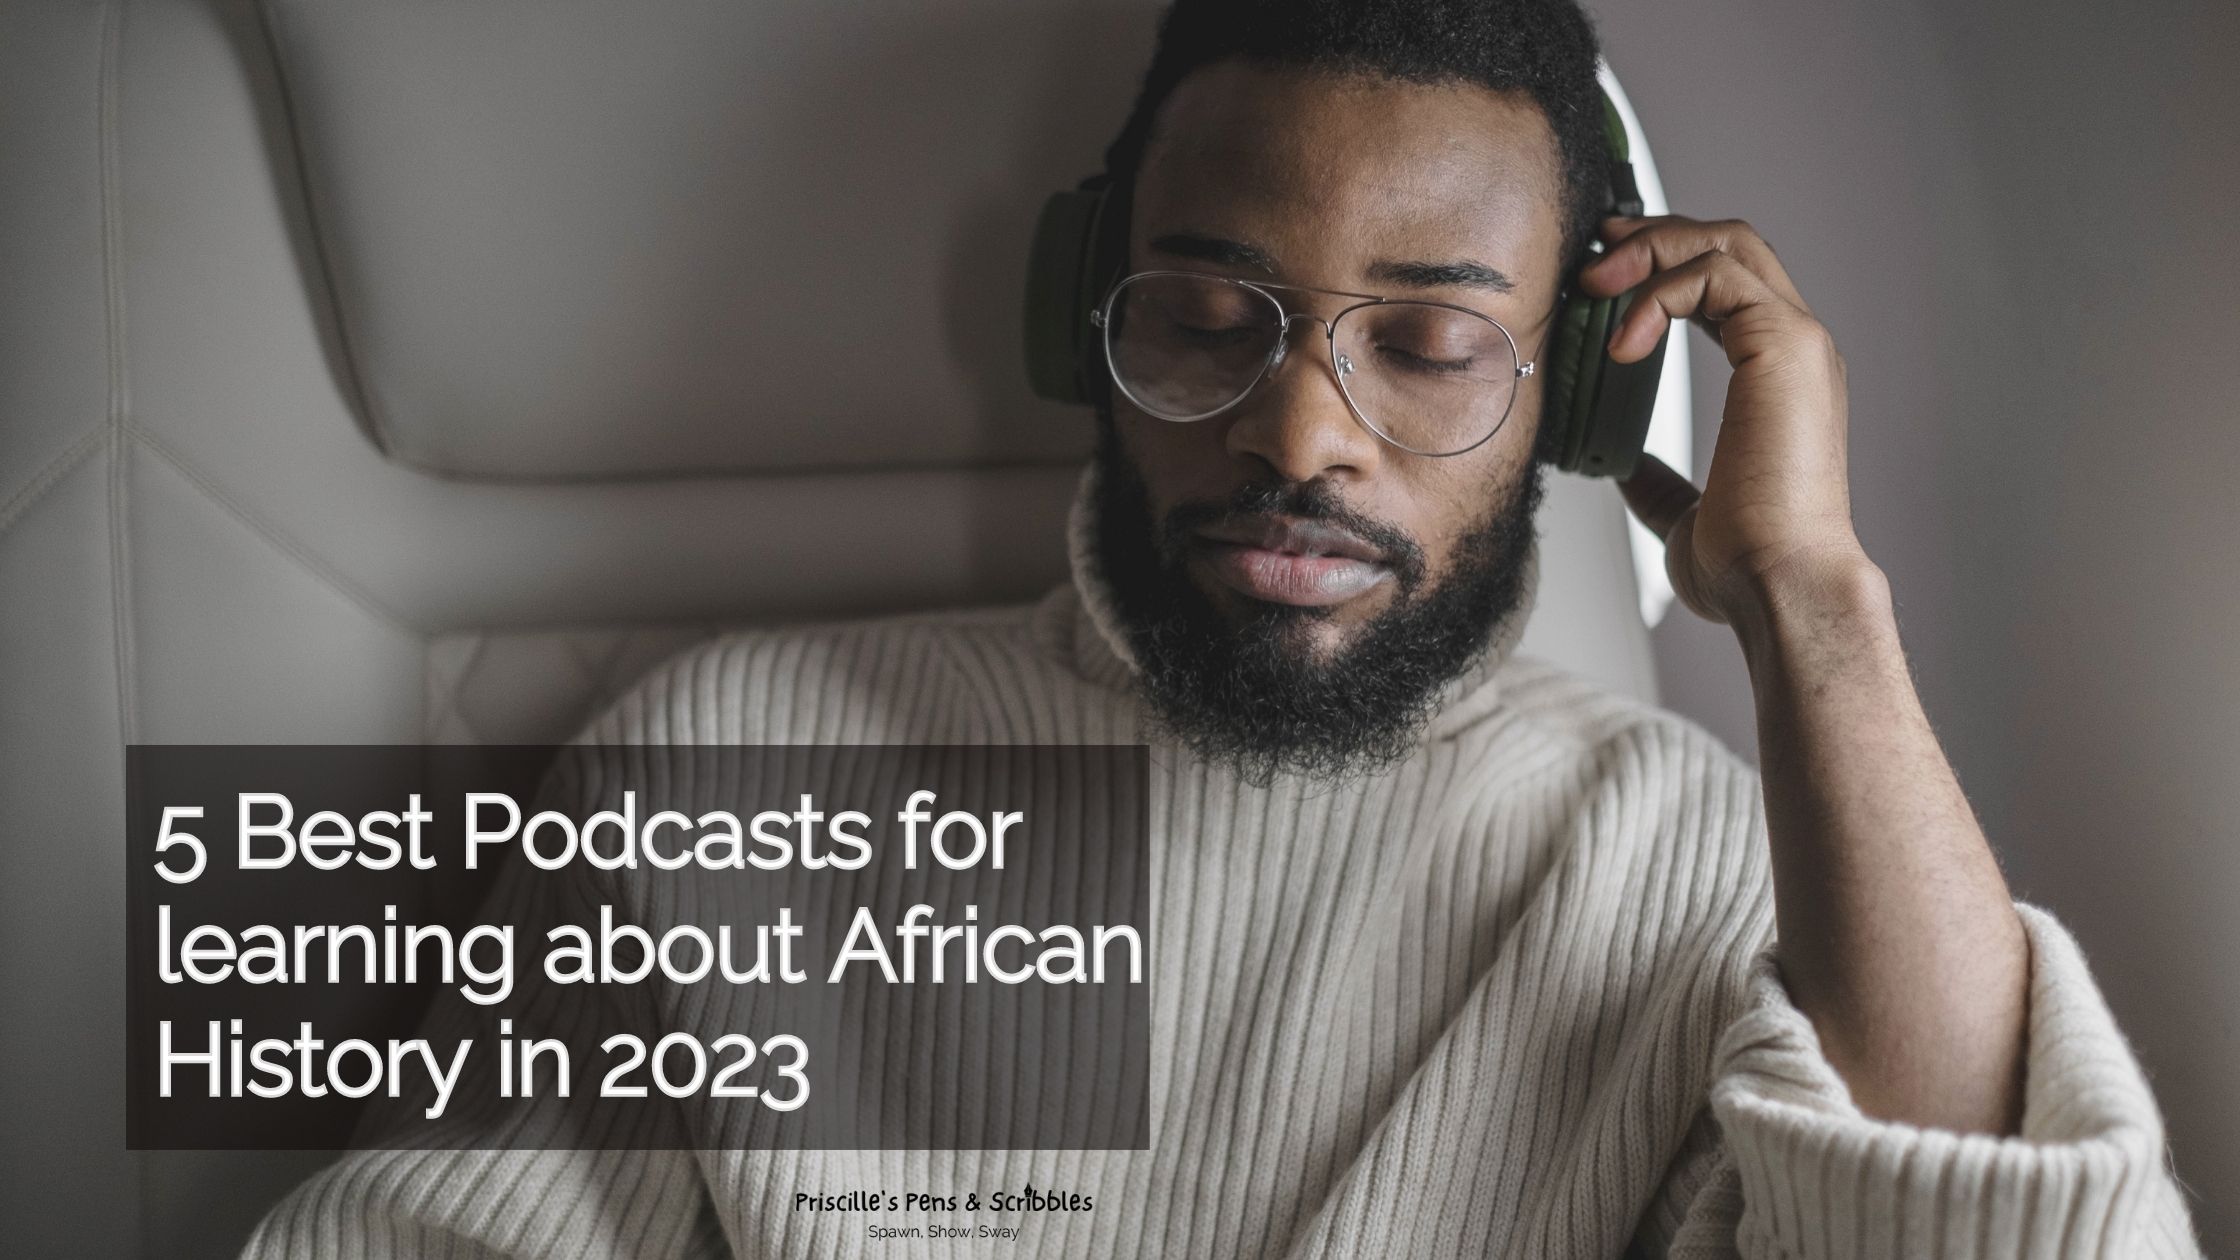 5 Best Podcasts for learning about African History in 2023